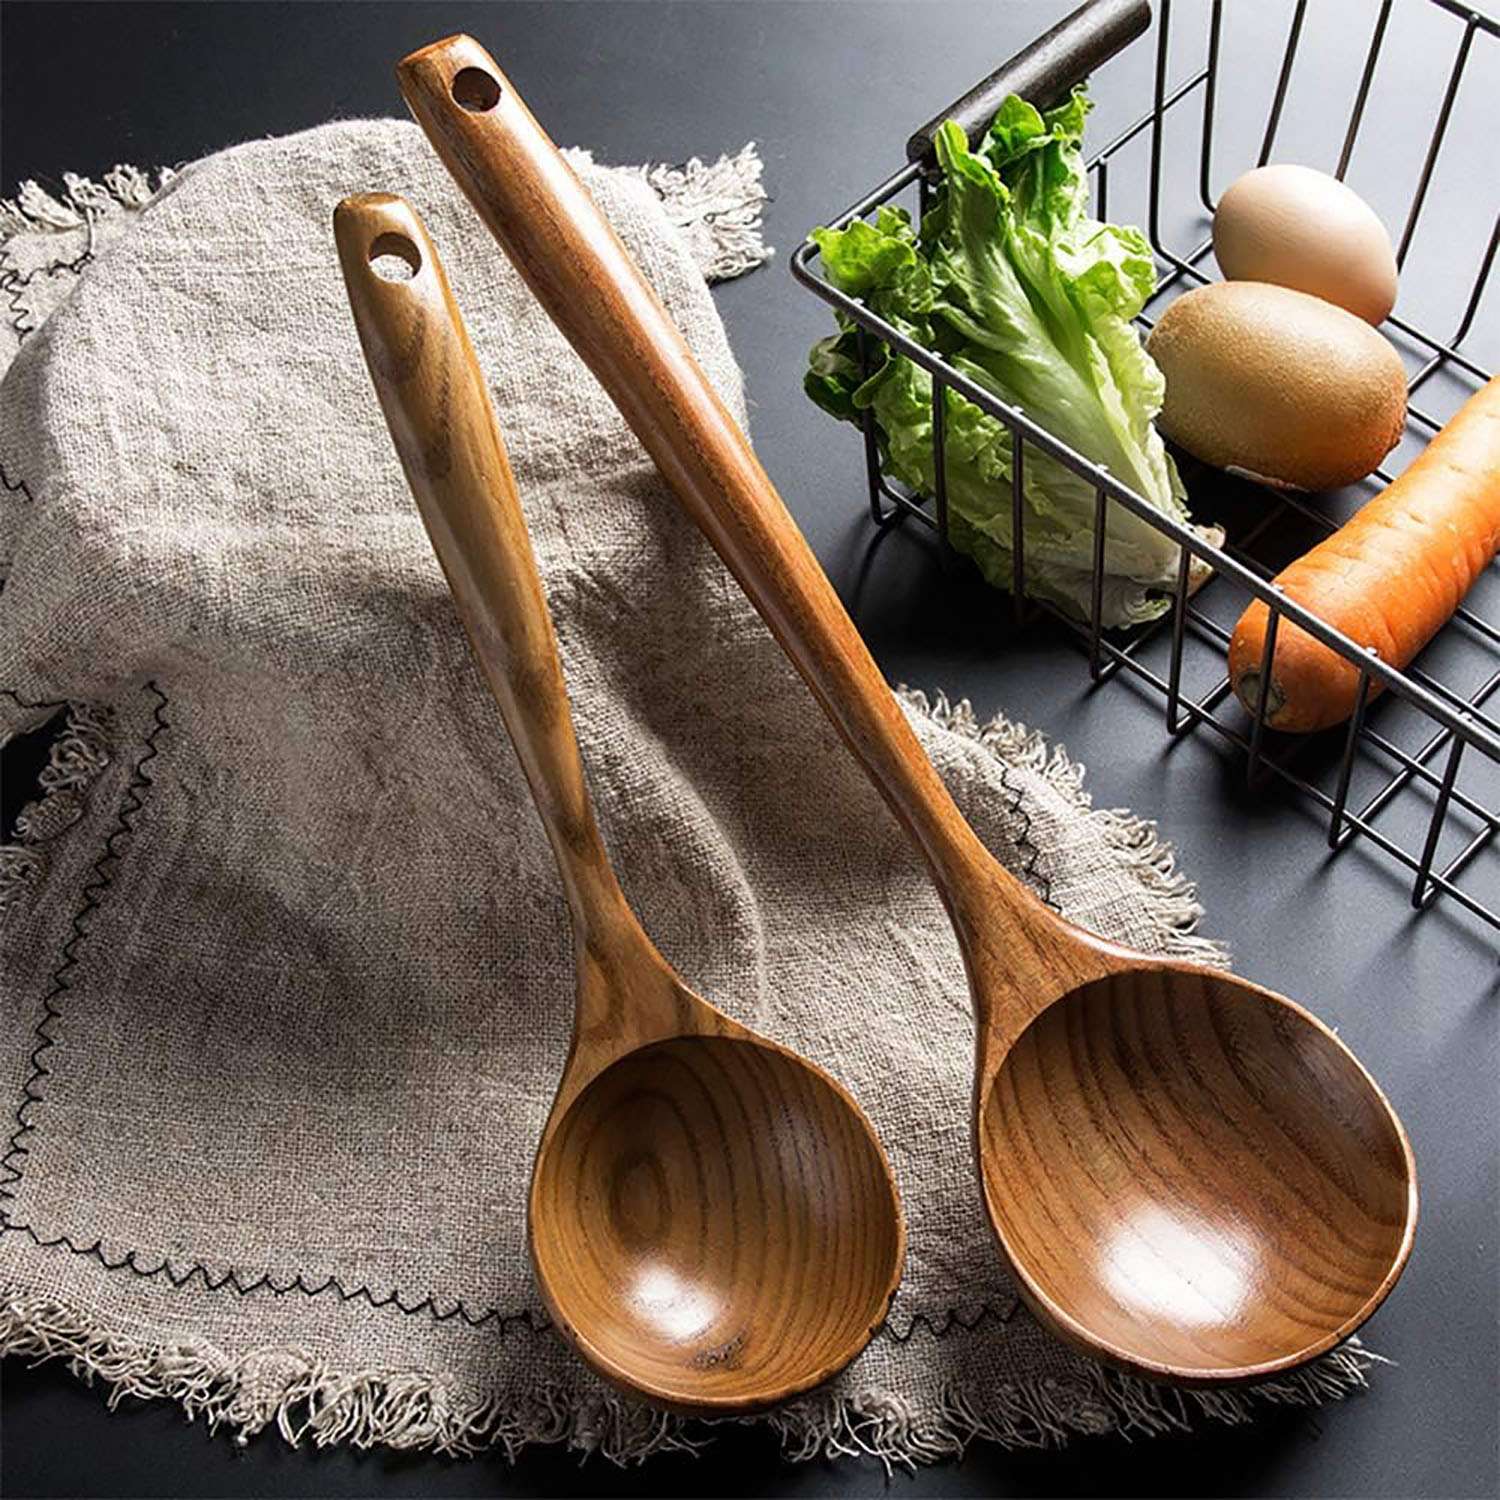 Wooden Spoon Ladle for Cooking | 14 inch Long | Kitchen Cooking Spoon & 11 inch Best Wood Spoons | Large Deep Serving Spoons | Soup Ladles Set